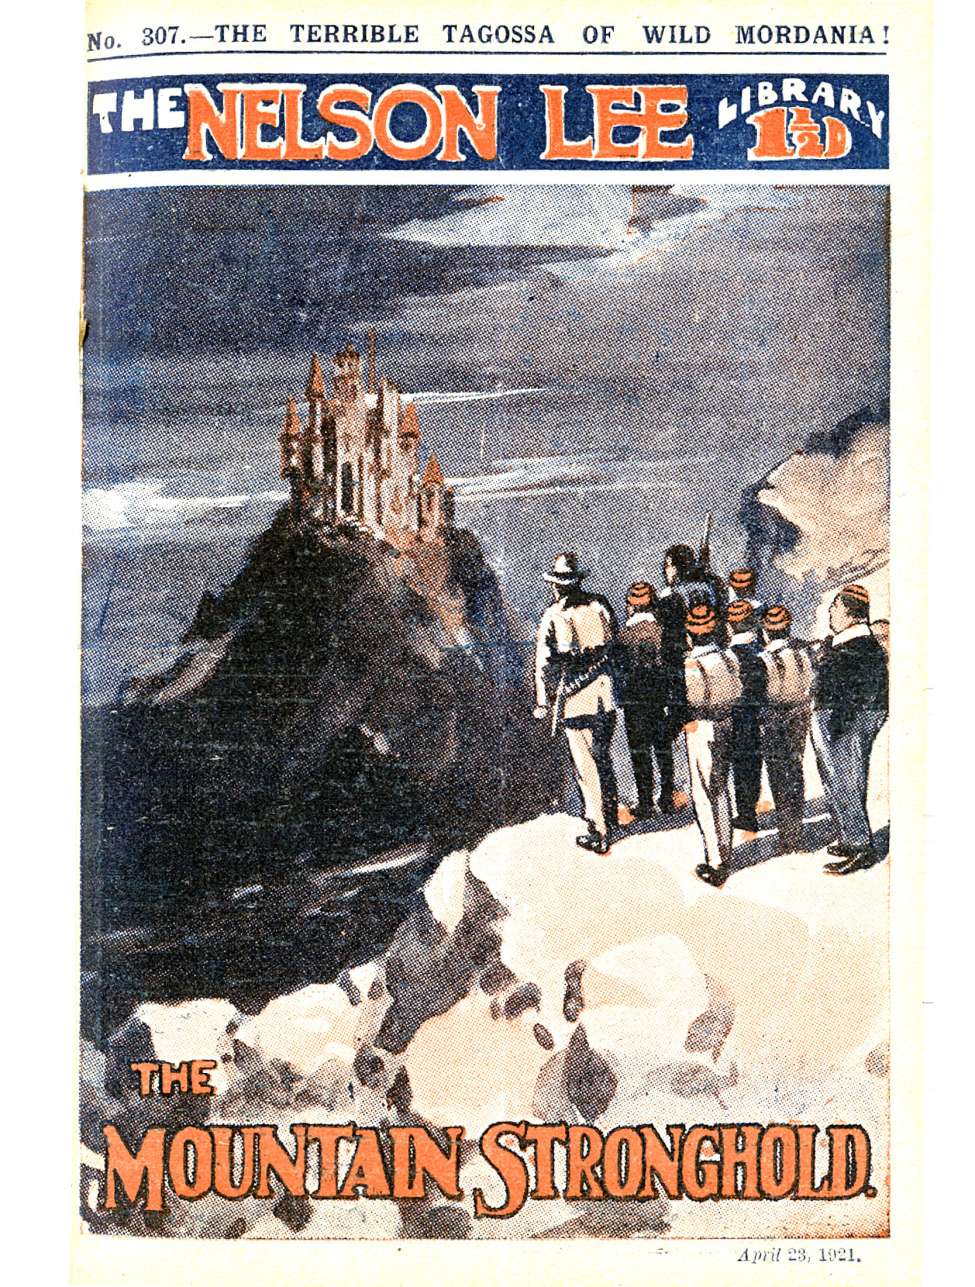 Book Cover For Nelson Lee Library s1 307 - The Mountain Stronghold